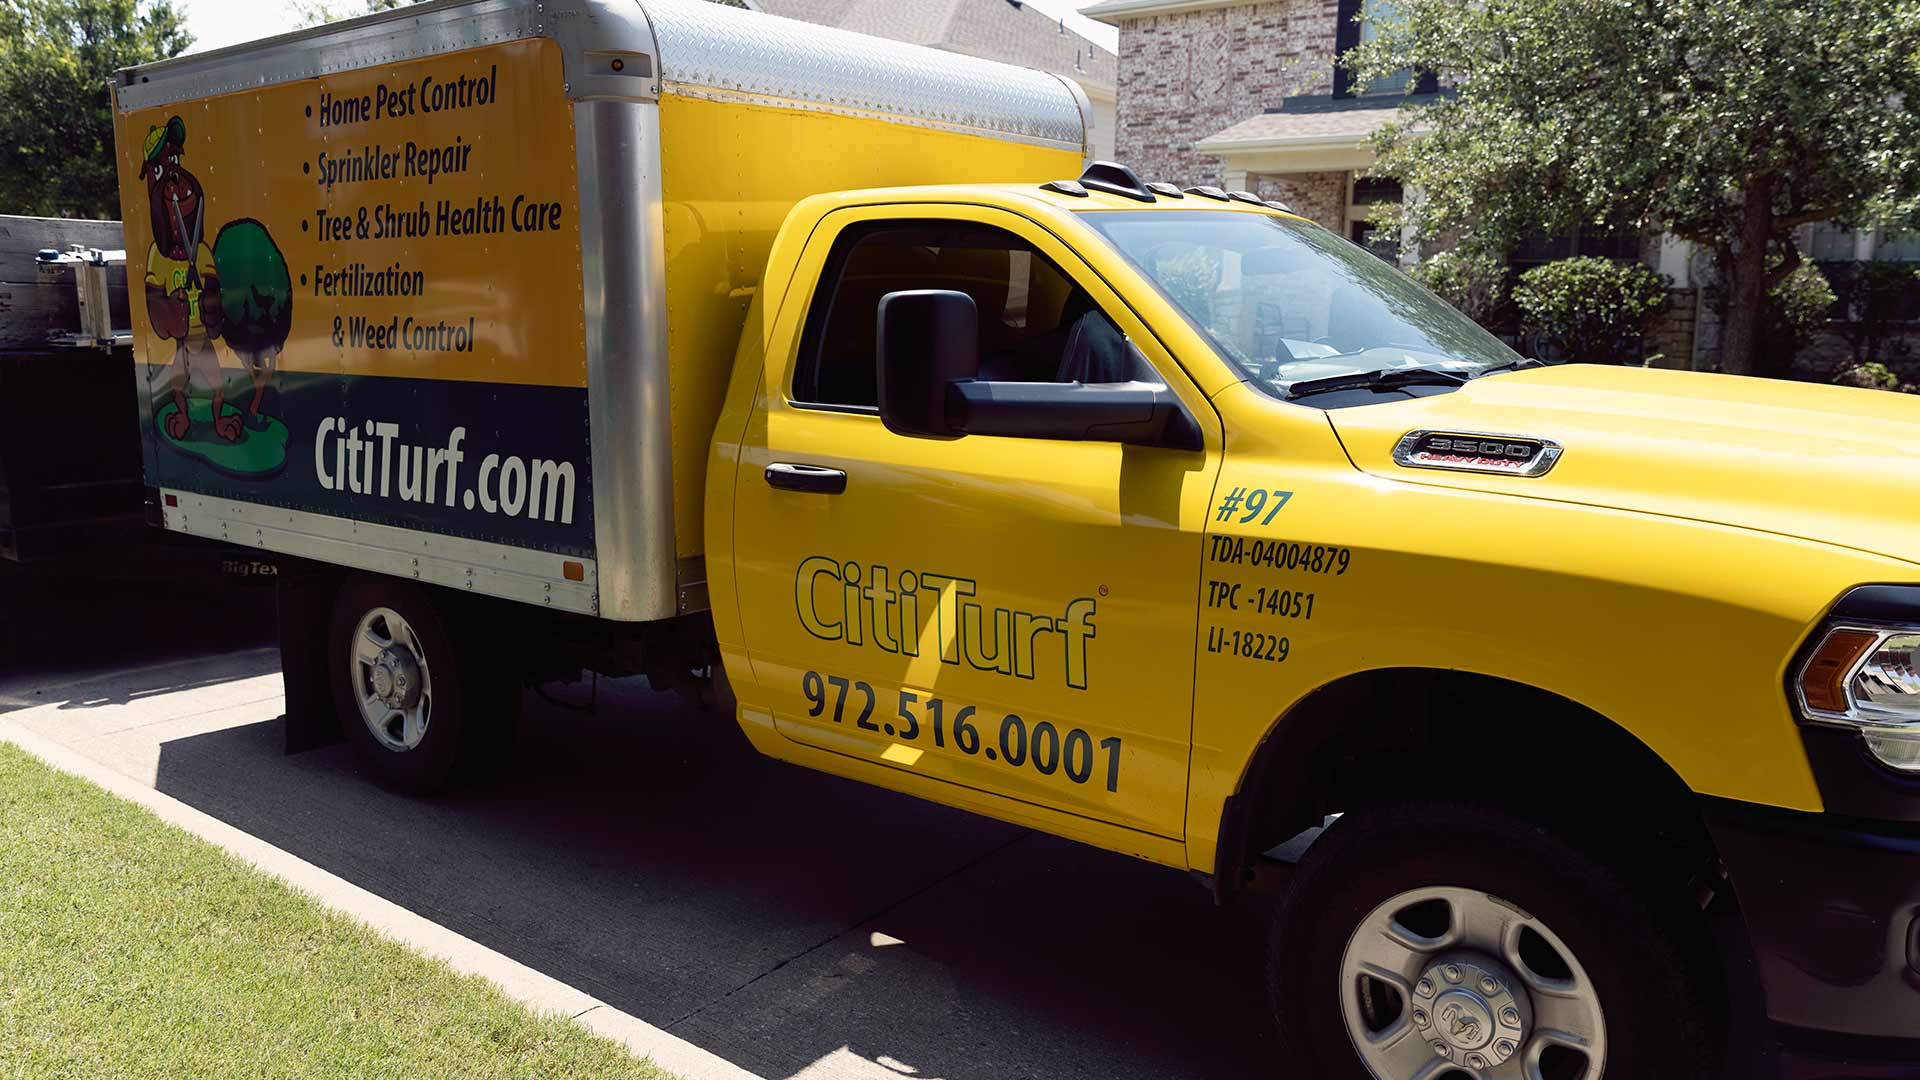 CitiTurf work truck servicing a property in Plano, TX.